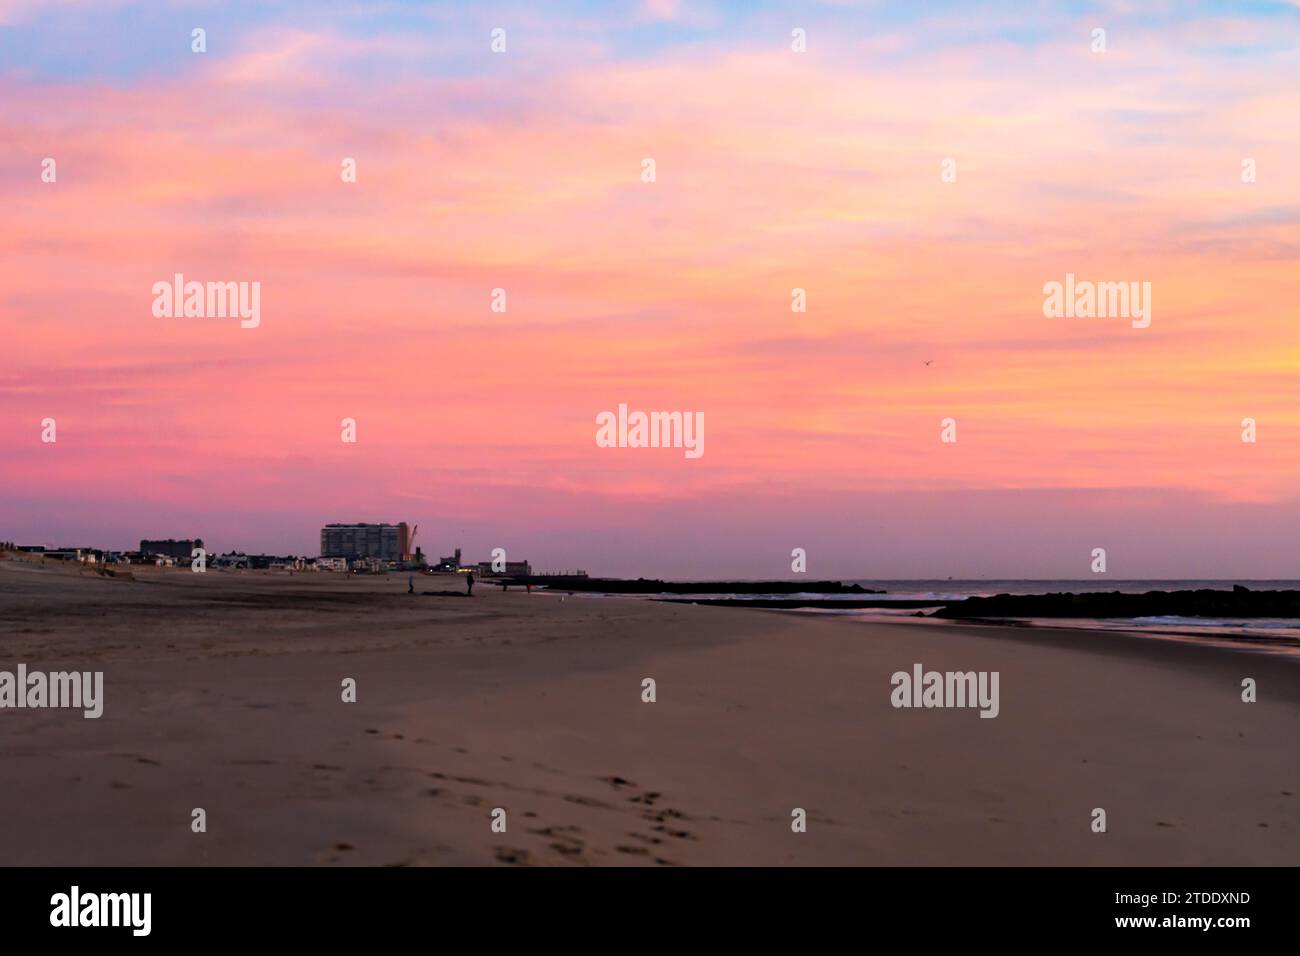 Sunrise over the beach on the New Jersey Shore Stock Photo